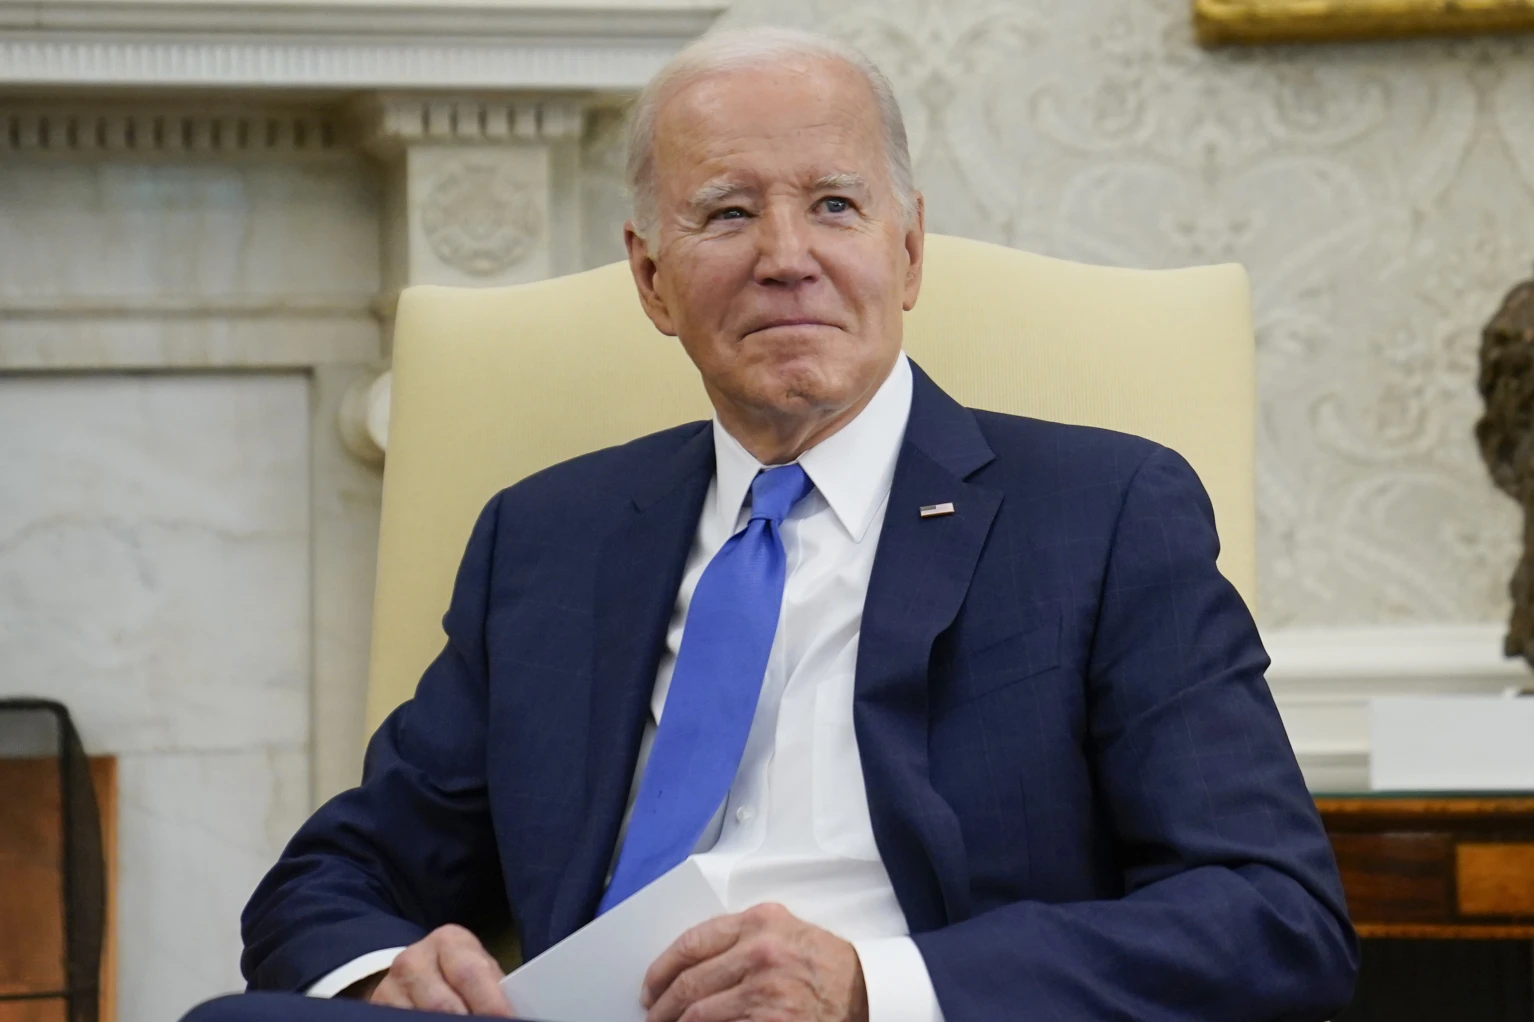 Biden 2024 strategy memo shows he plans to ride on 2020 themes, draw contrast to Trump